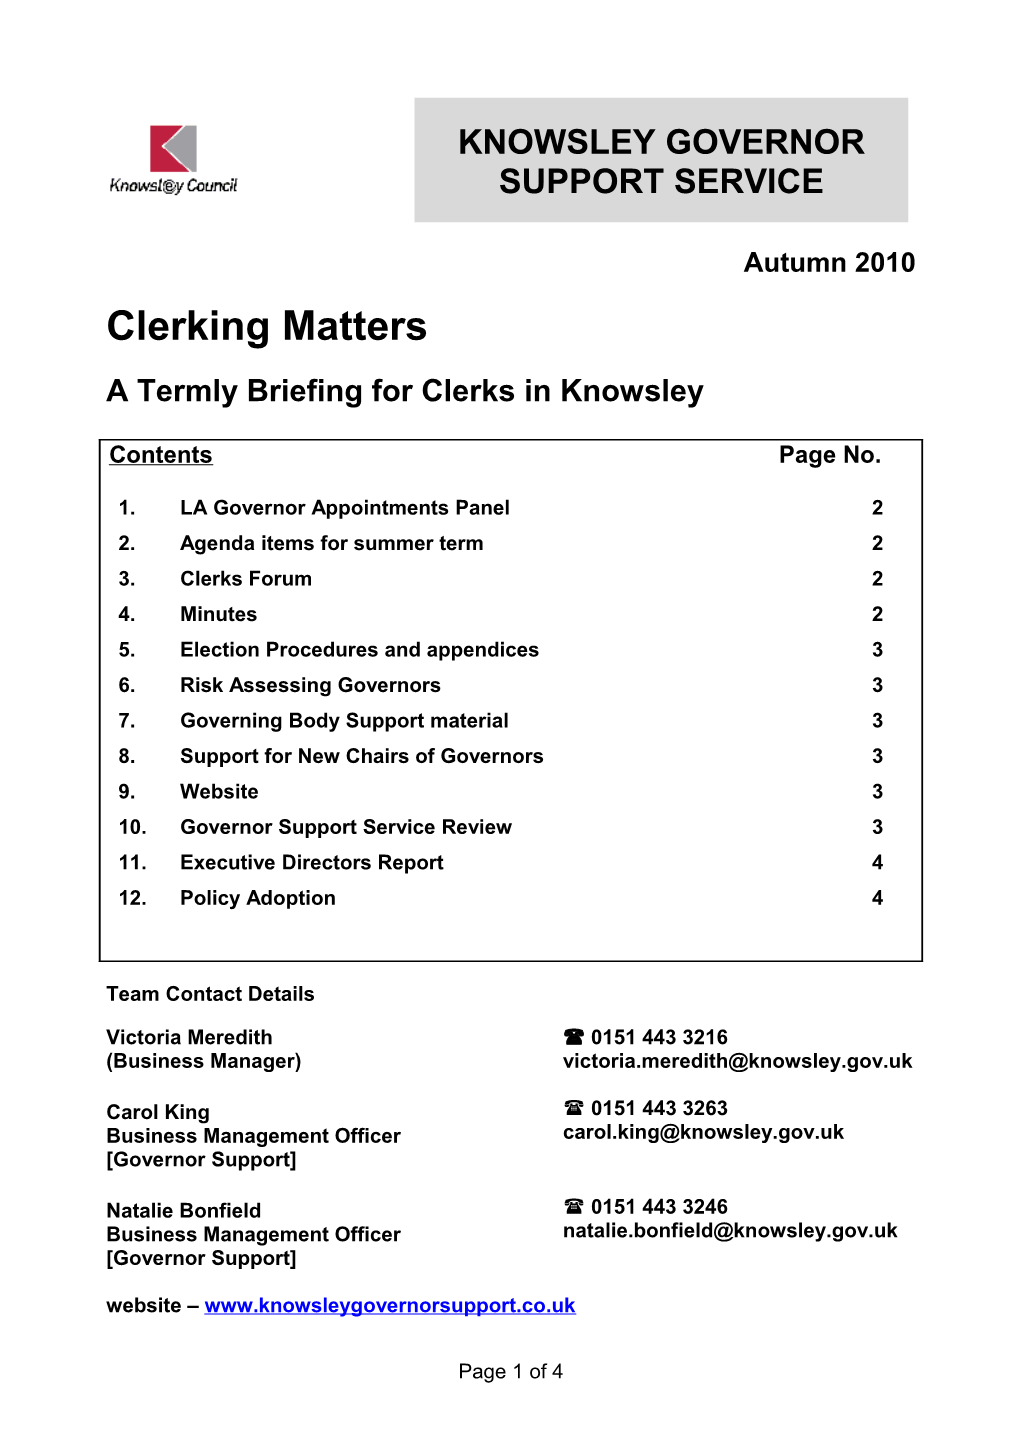 A Termly Briefing for Clerks in Knowsley